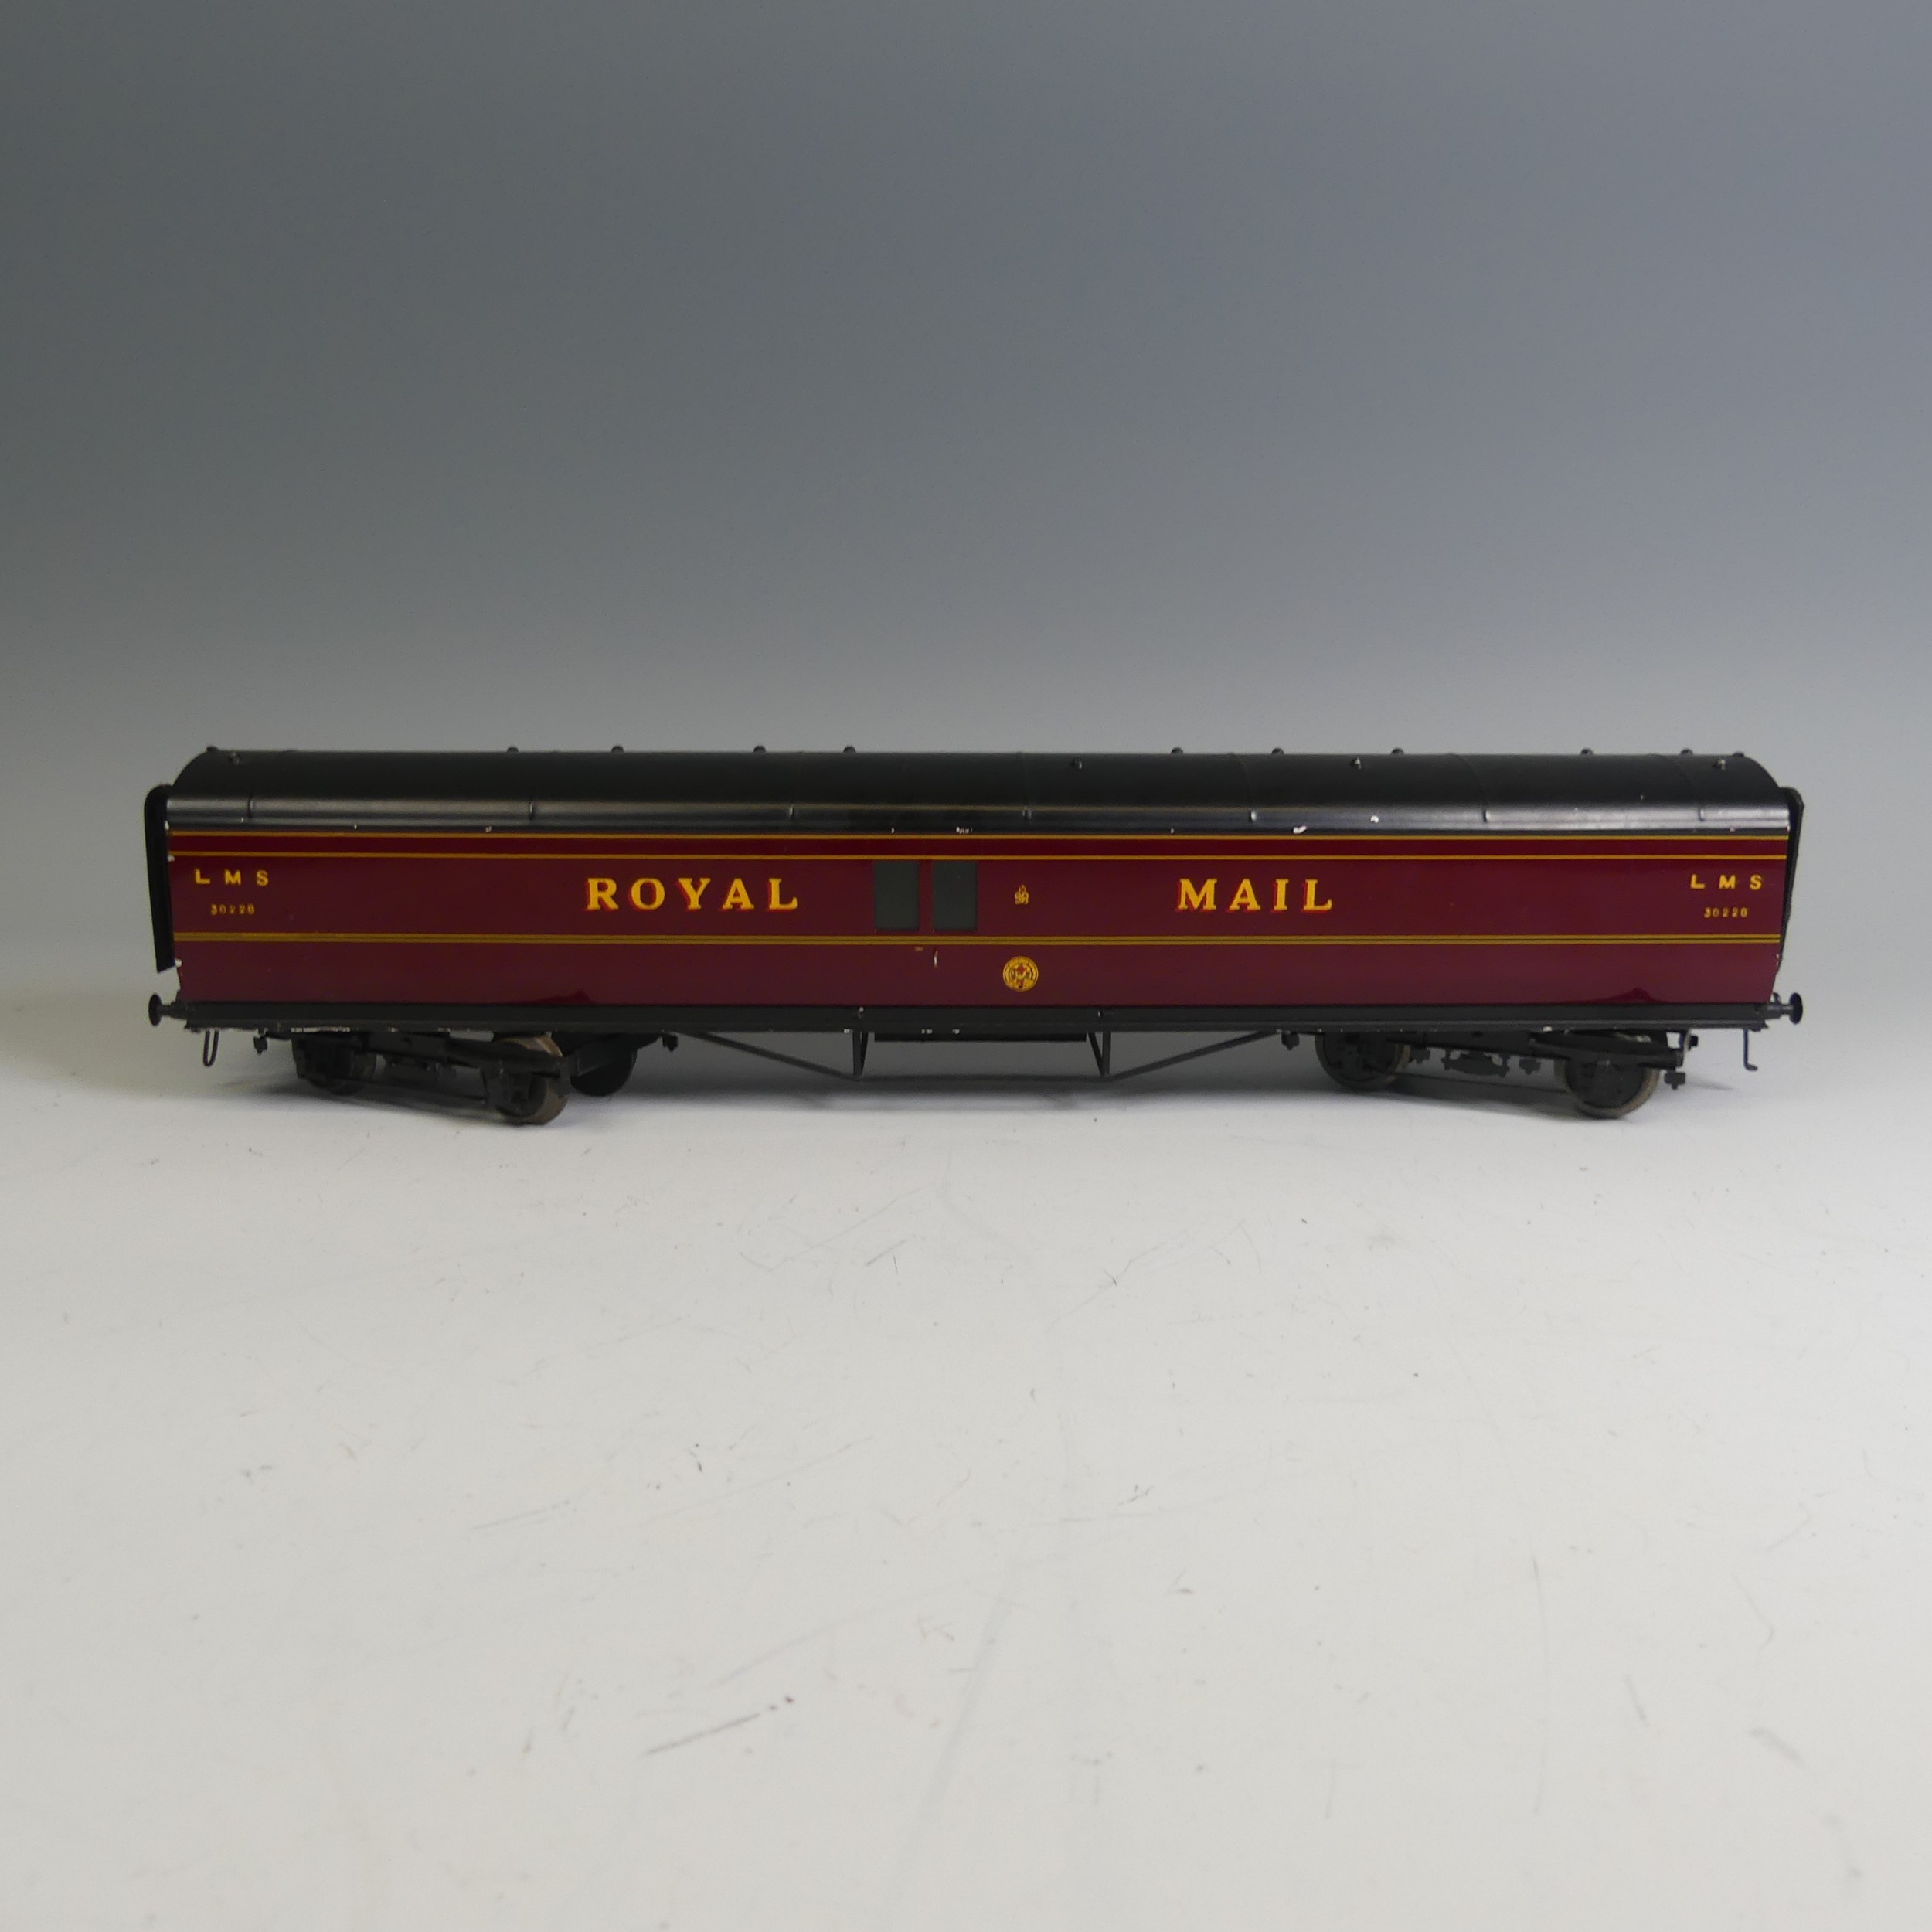 Exley ‘0’ gauge LMS Royal Mail Coach, in LMS maroon with yellow lettering, No. 30228. - Image 4 of 5